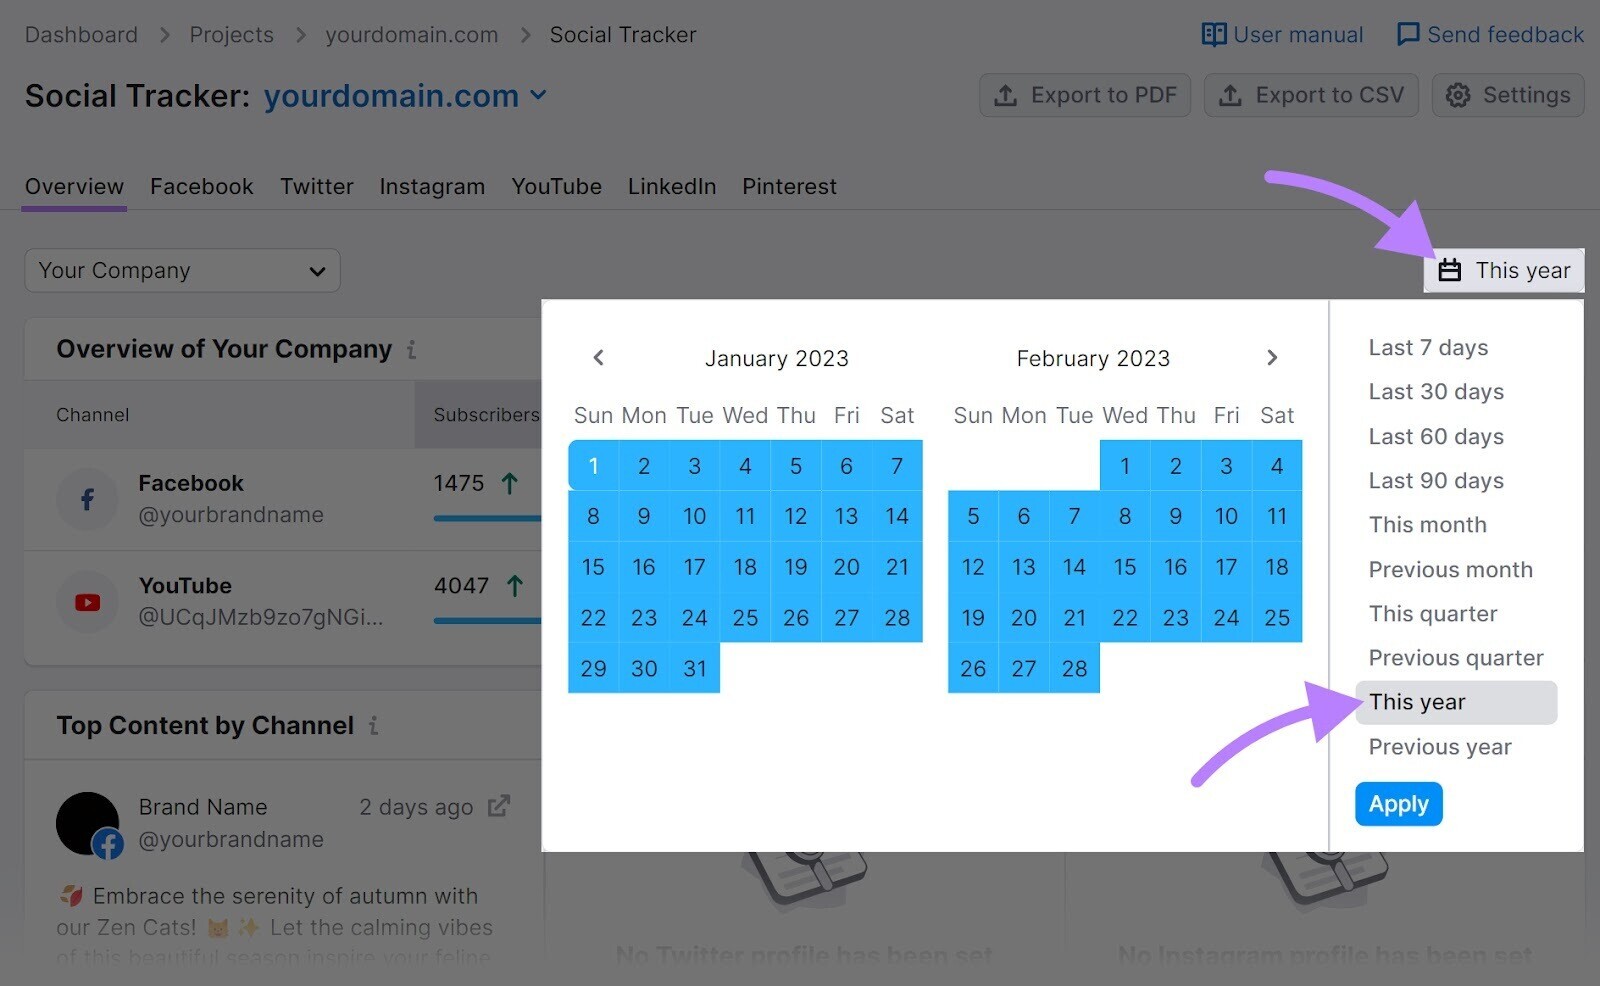 Selecting a date range in Social Tracker “Overview” section